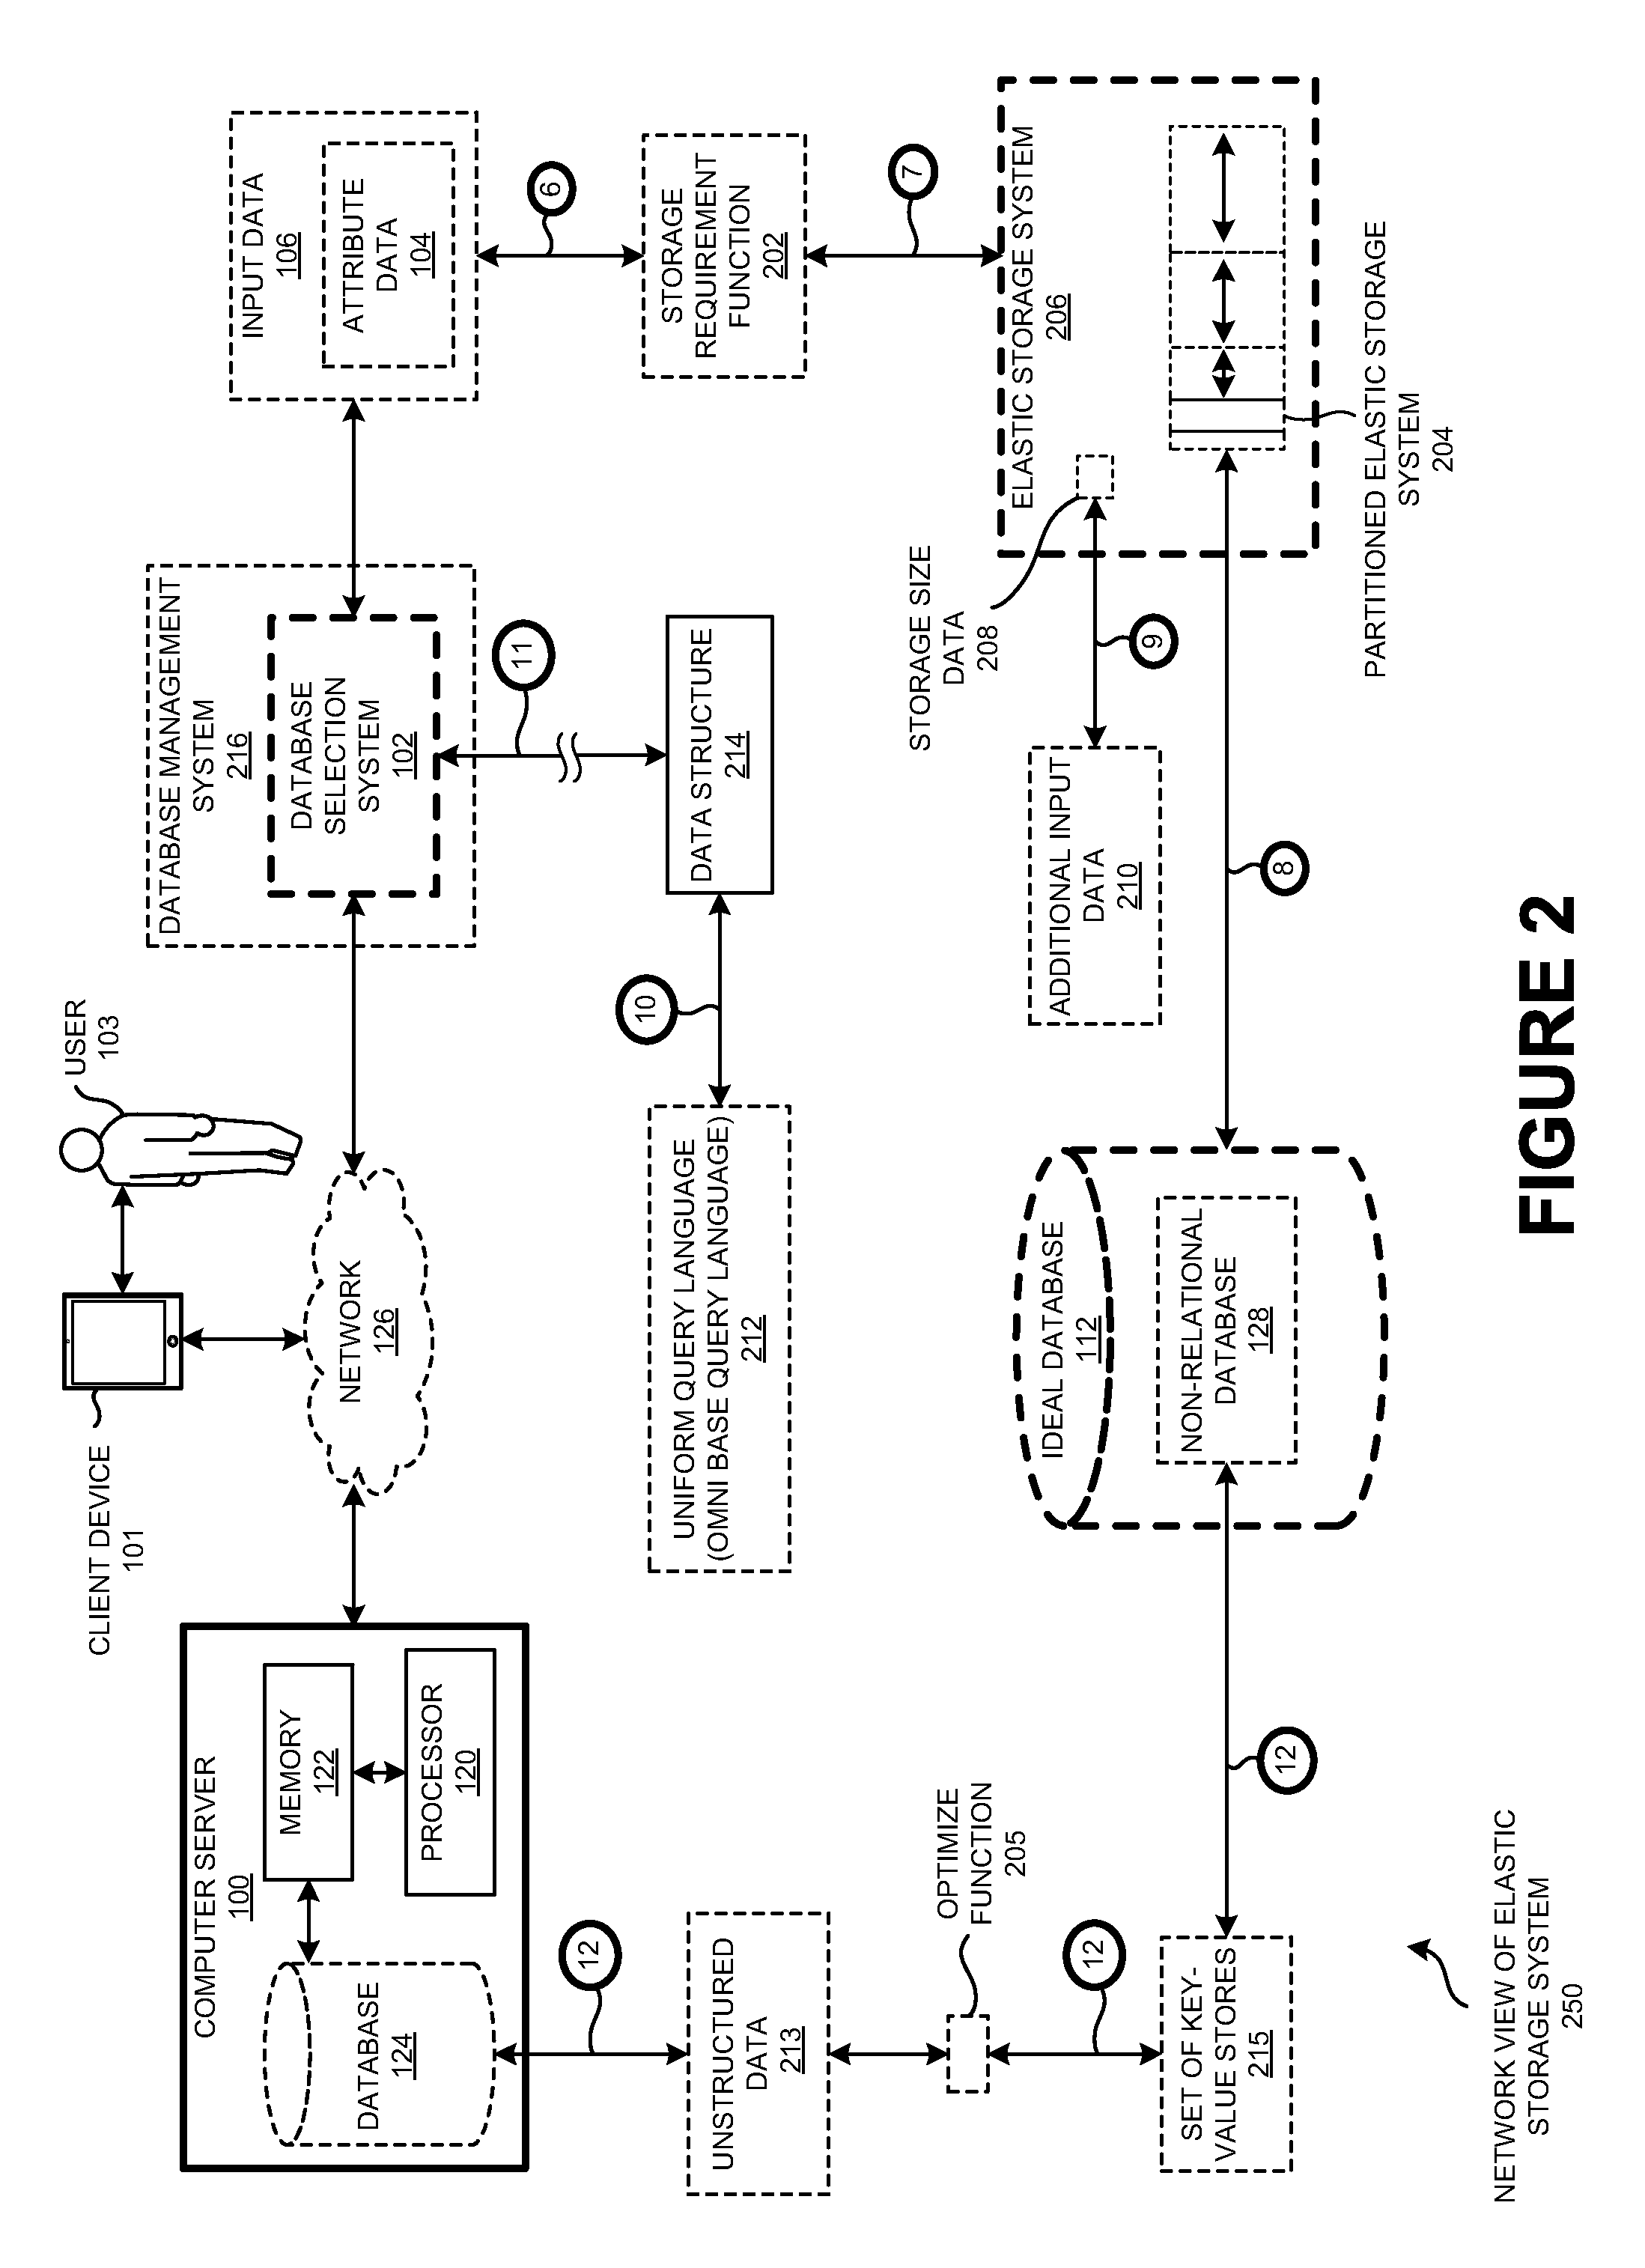 Database selection system and method to automatically adjust a database schema based on an input data